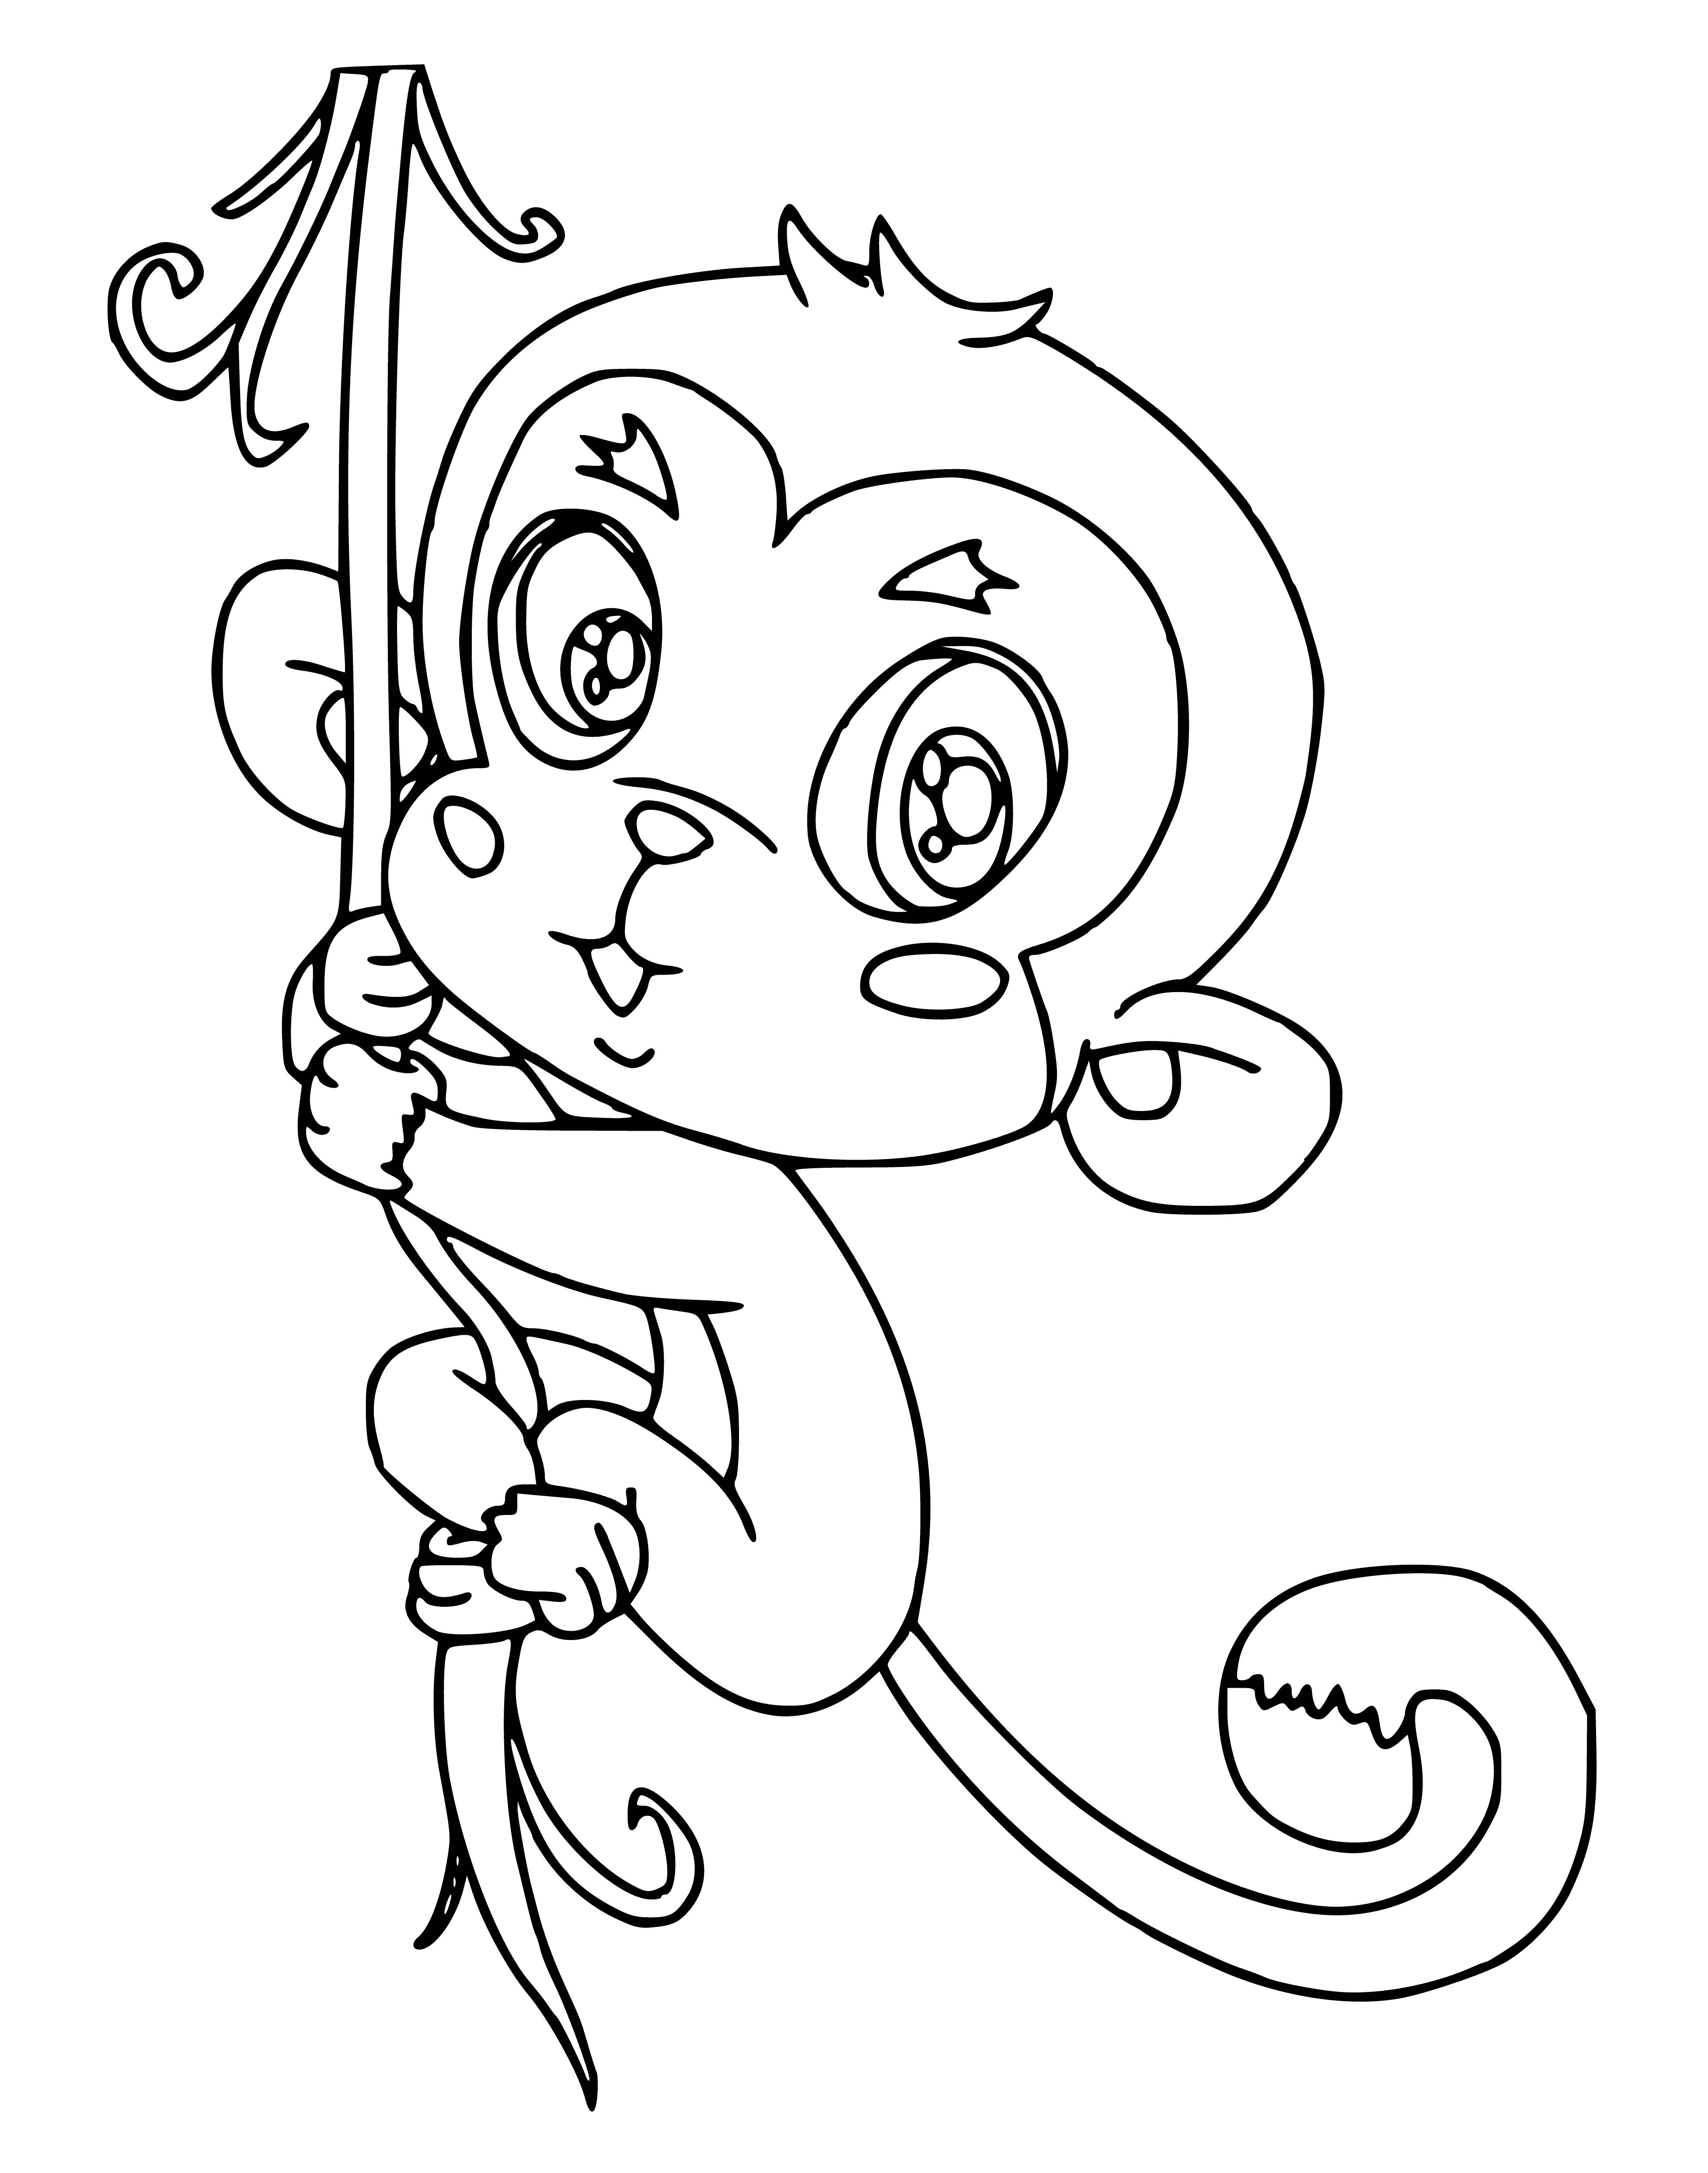 coloring page: 5 monkeys in a tree: 3 eyes closed, 2 eyes open; 1 eating a banana.